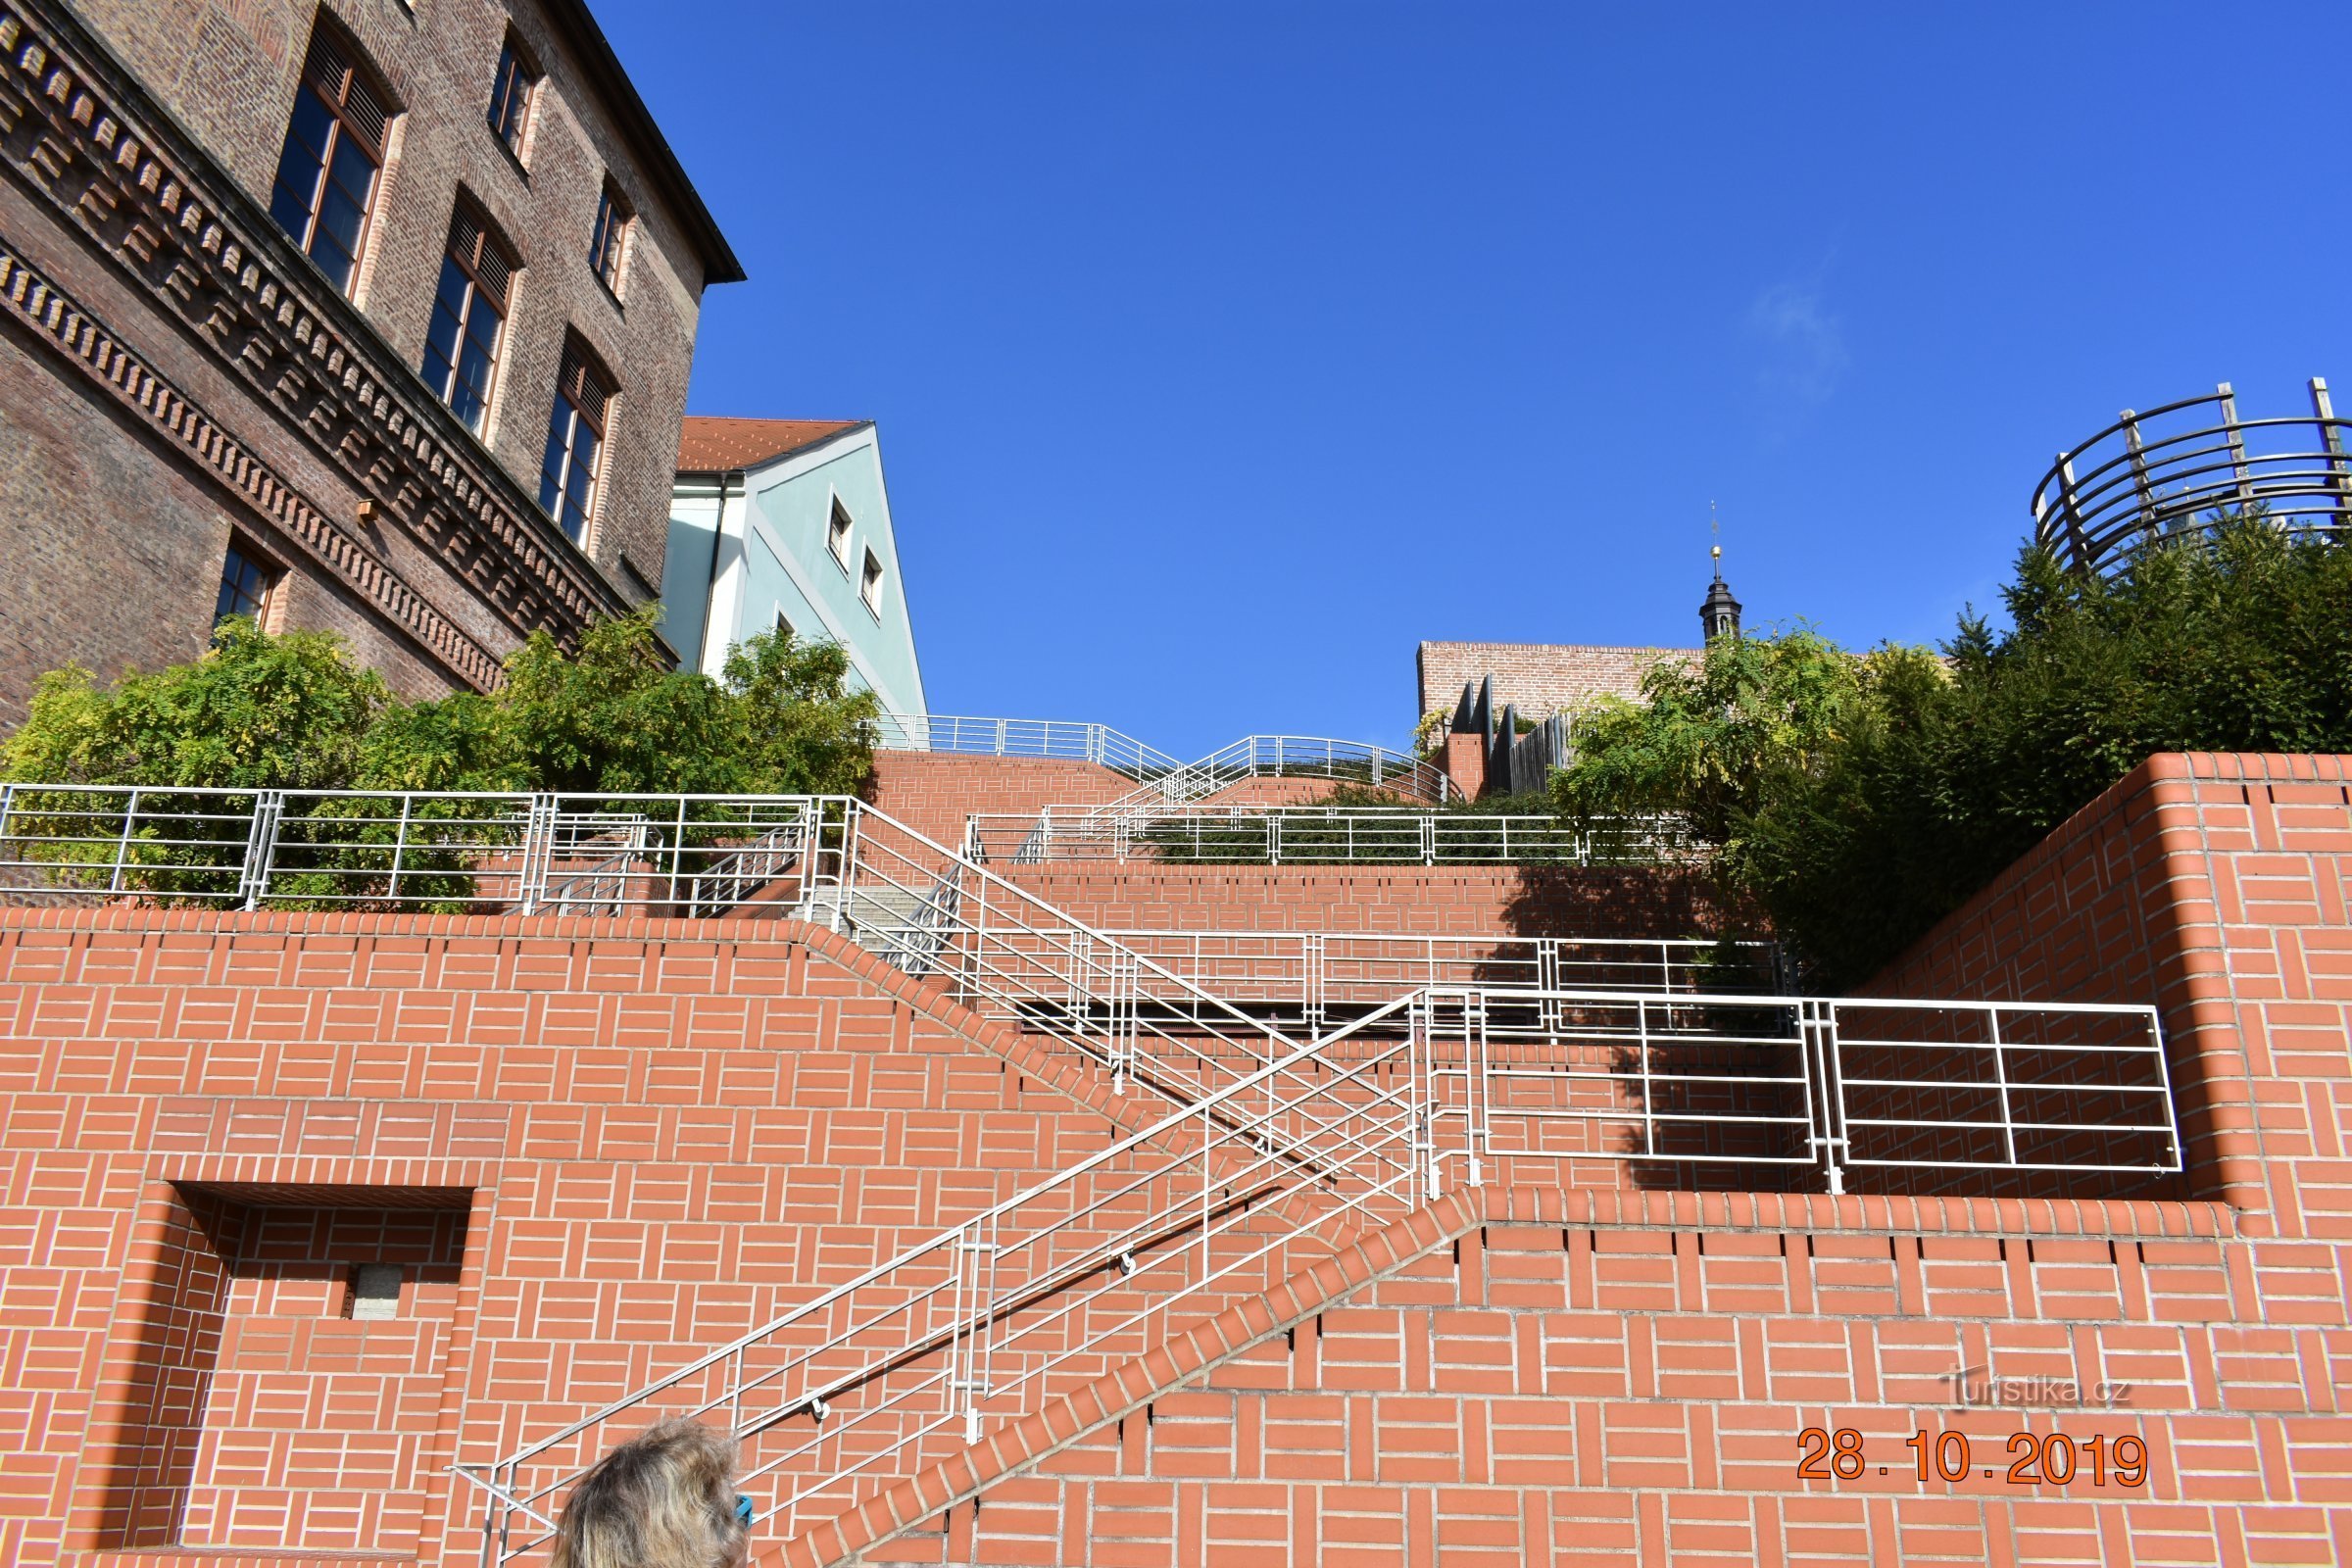 Bono publico staircase in Hradec Králové after reconstruction in 2019